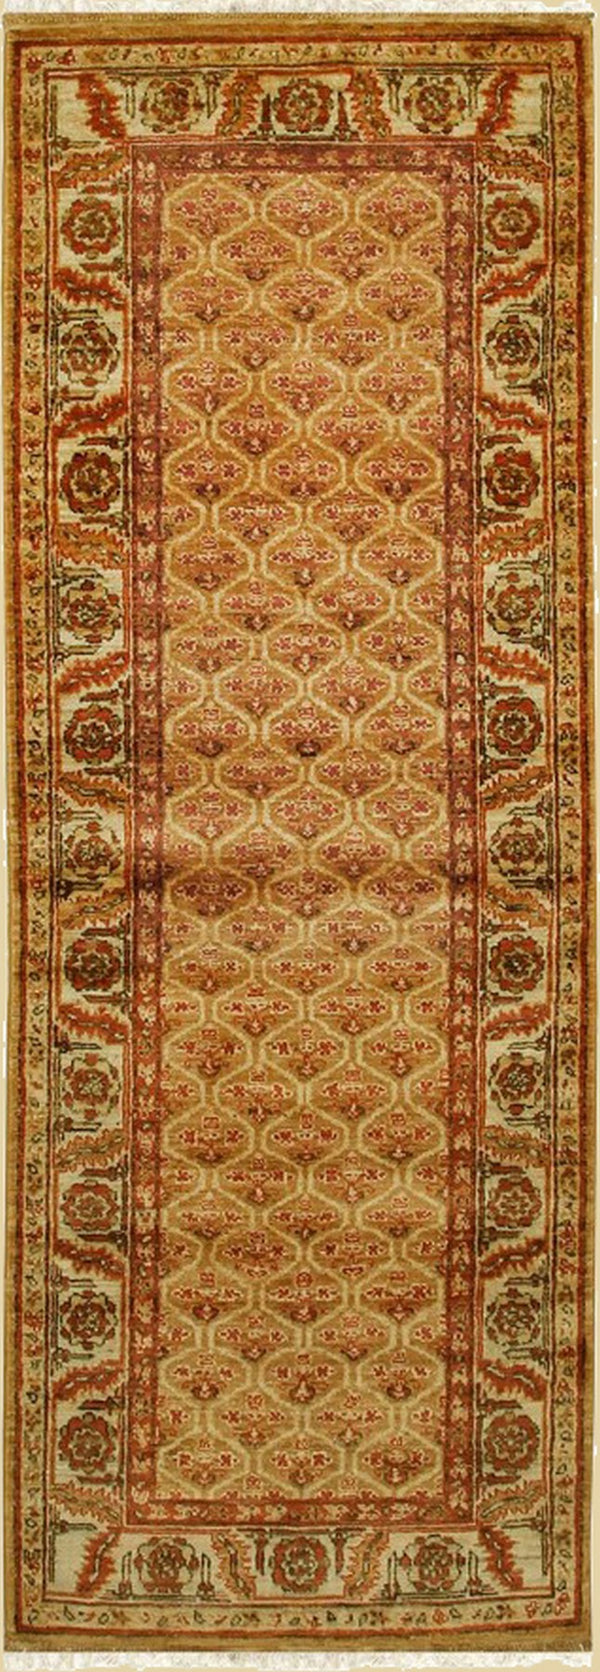 Hand Knotted Wool Brown Traditional Floral Heriz Deign Weave Rug, Made in India